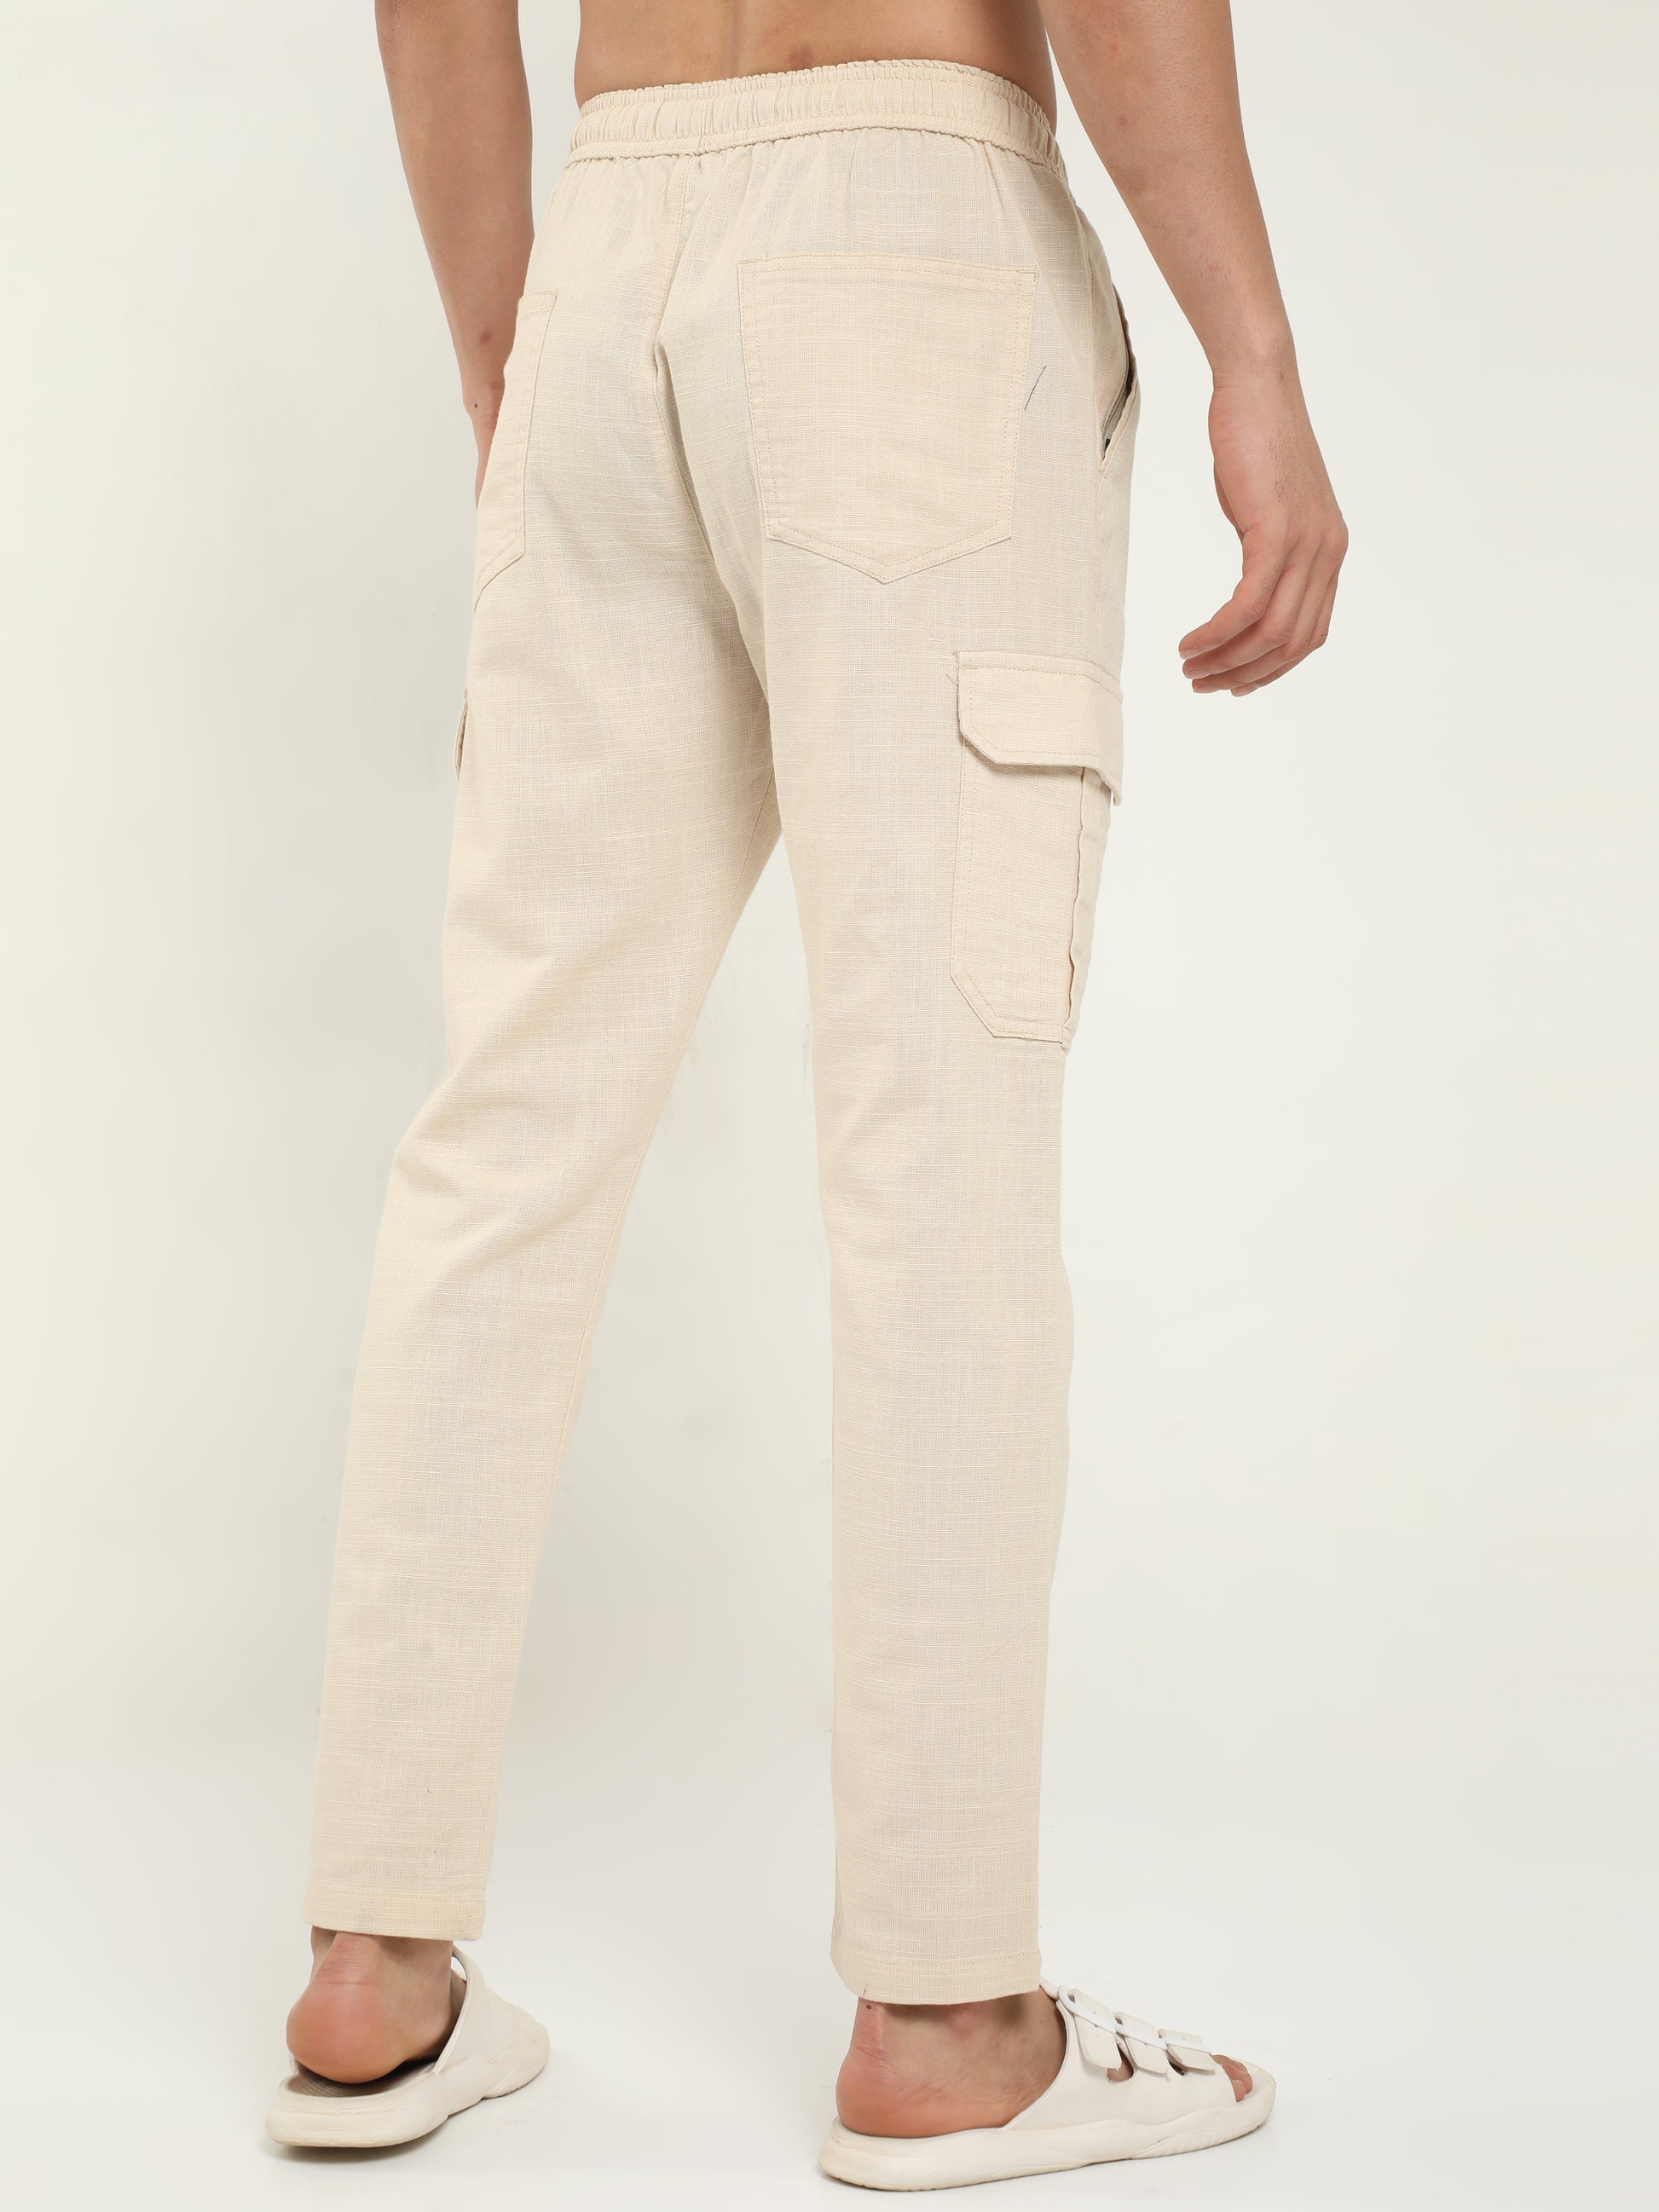 Shop Latest Beige Linen Trousers At Great Price – Marquee